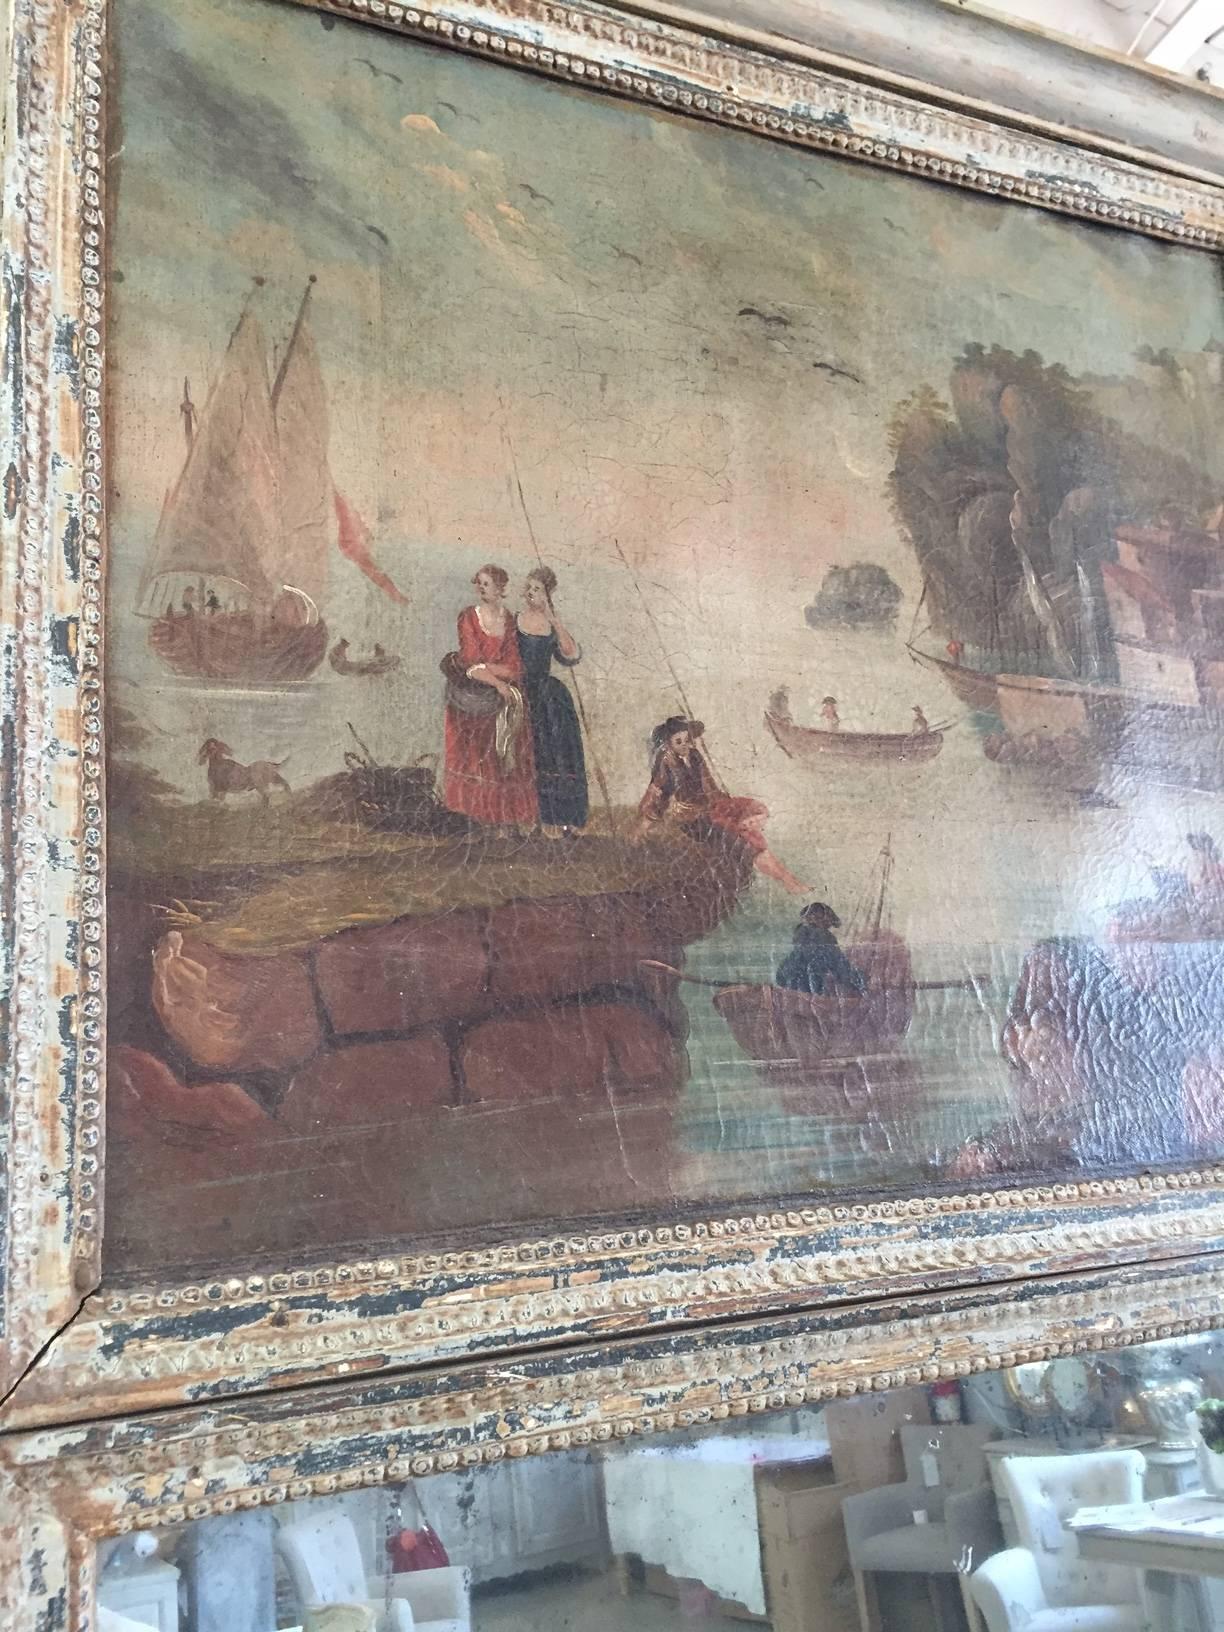 Painting is hand-painted landscape scene from the early 1800s. All painting is original.